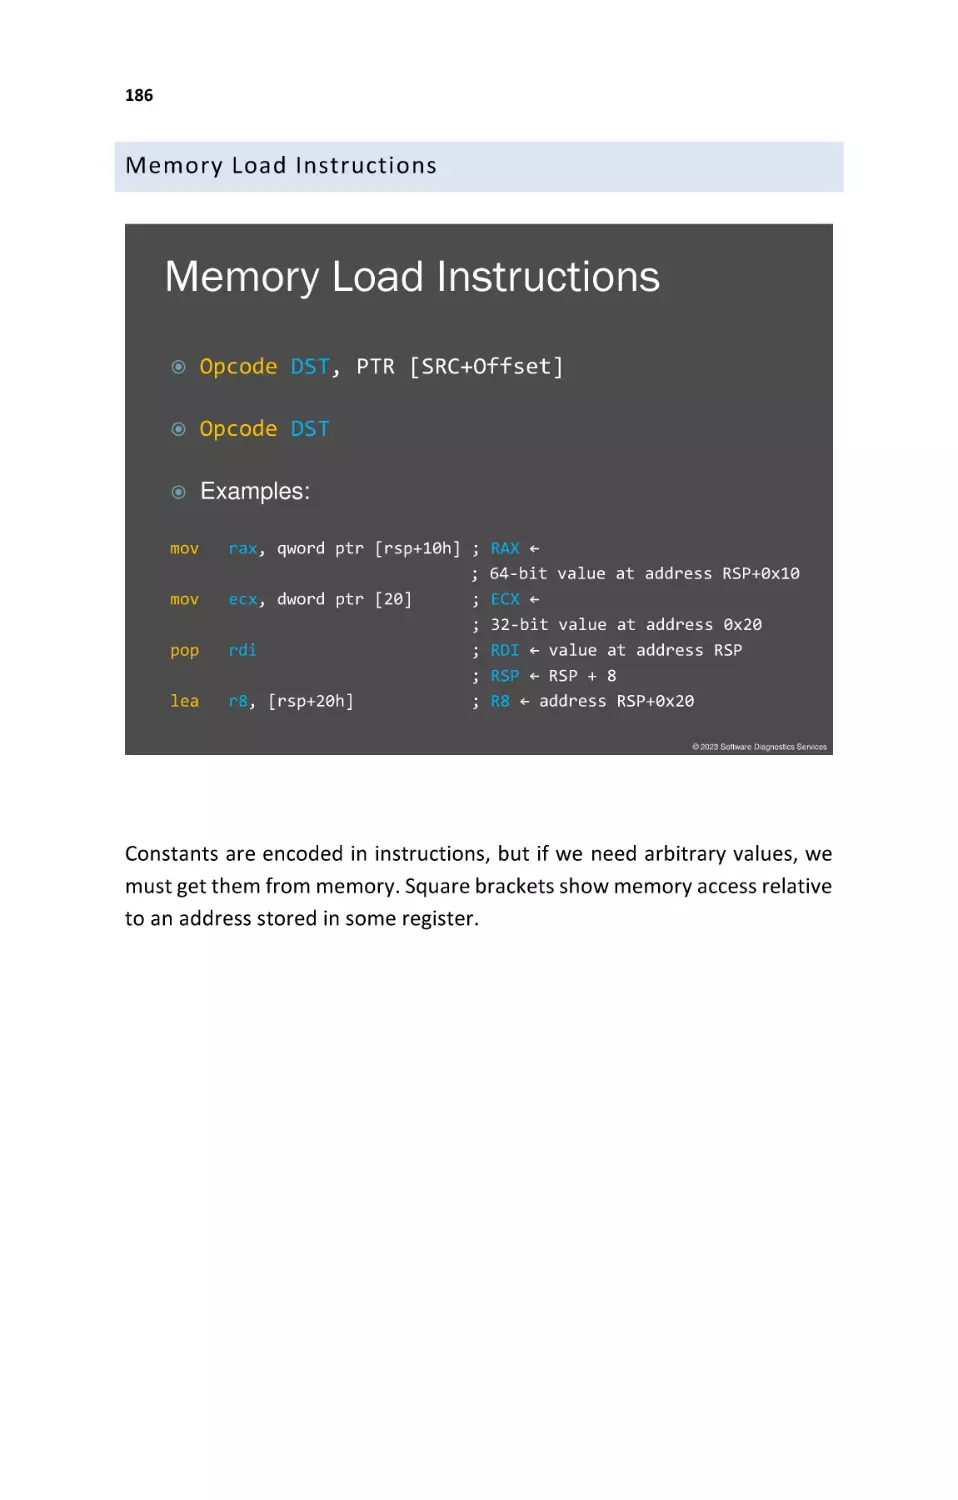 Memory Load Instructions